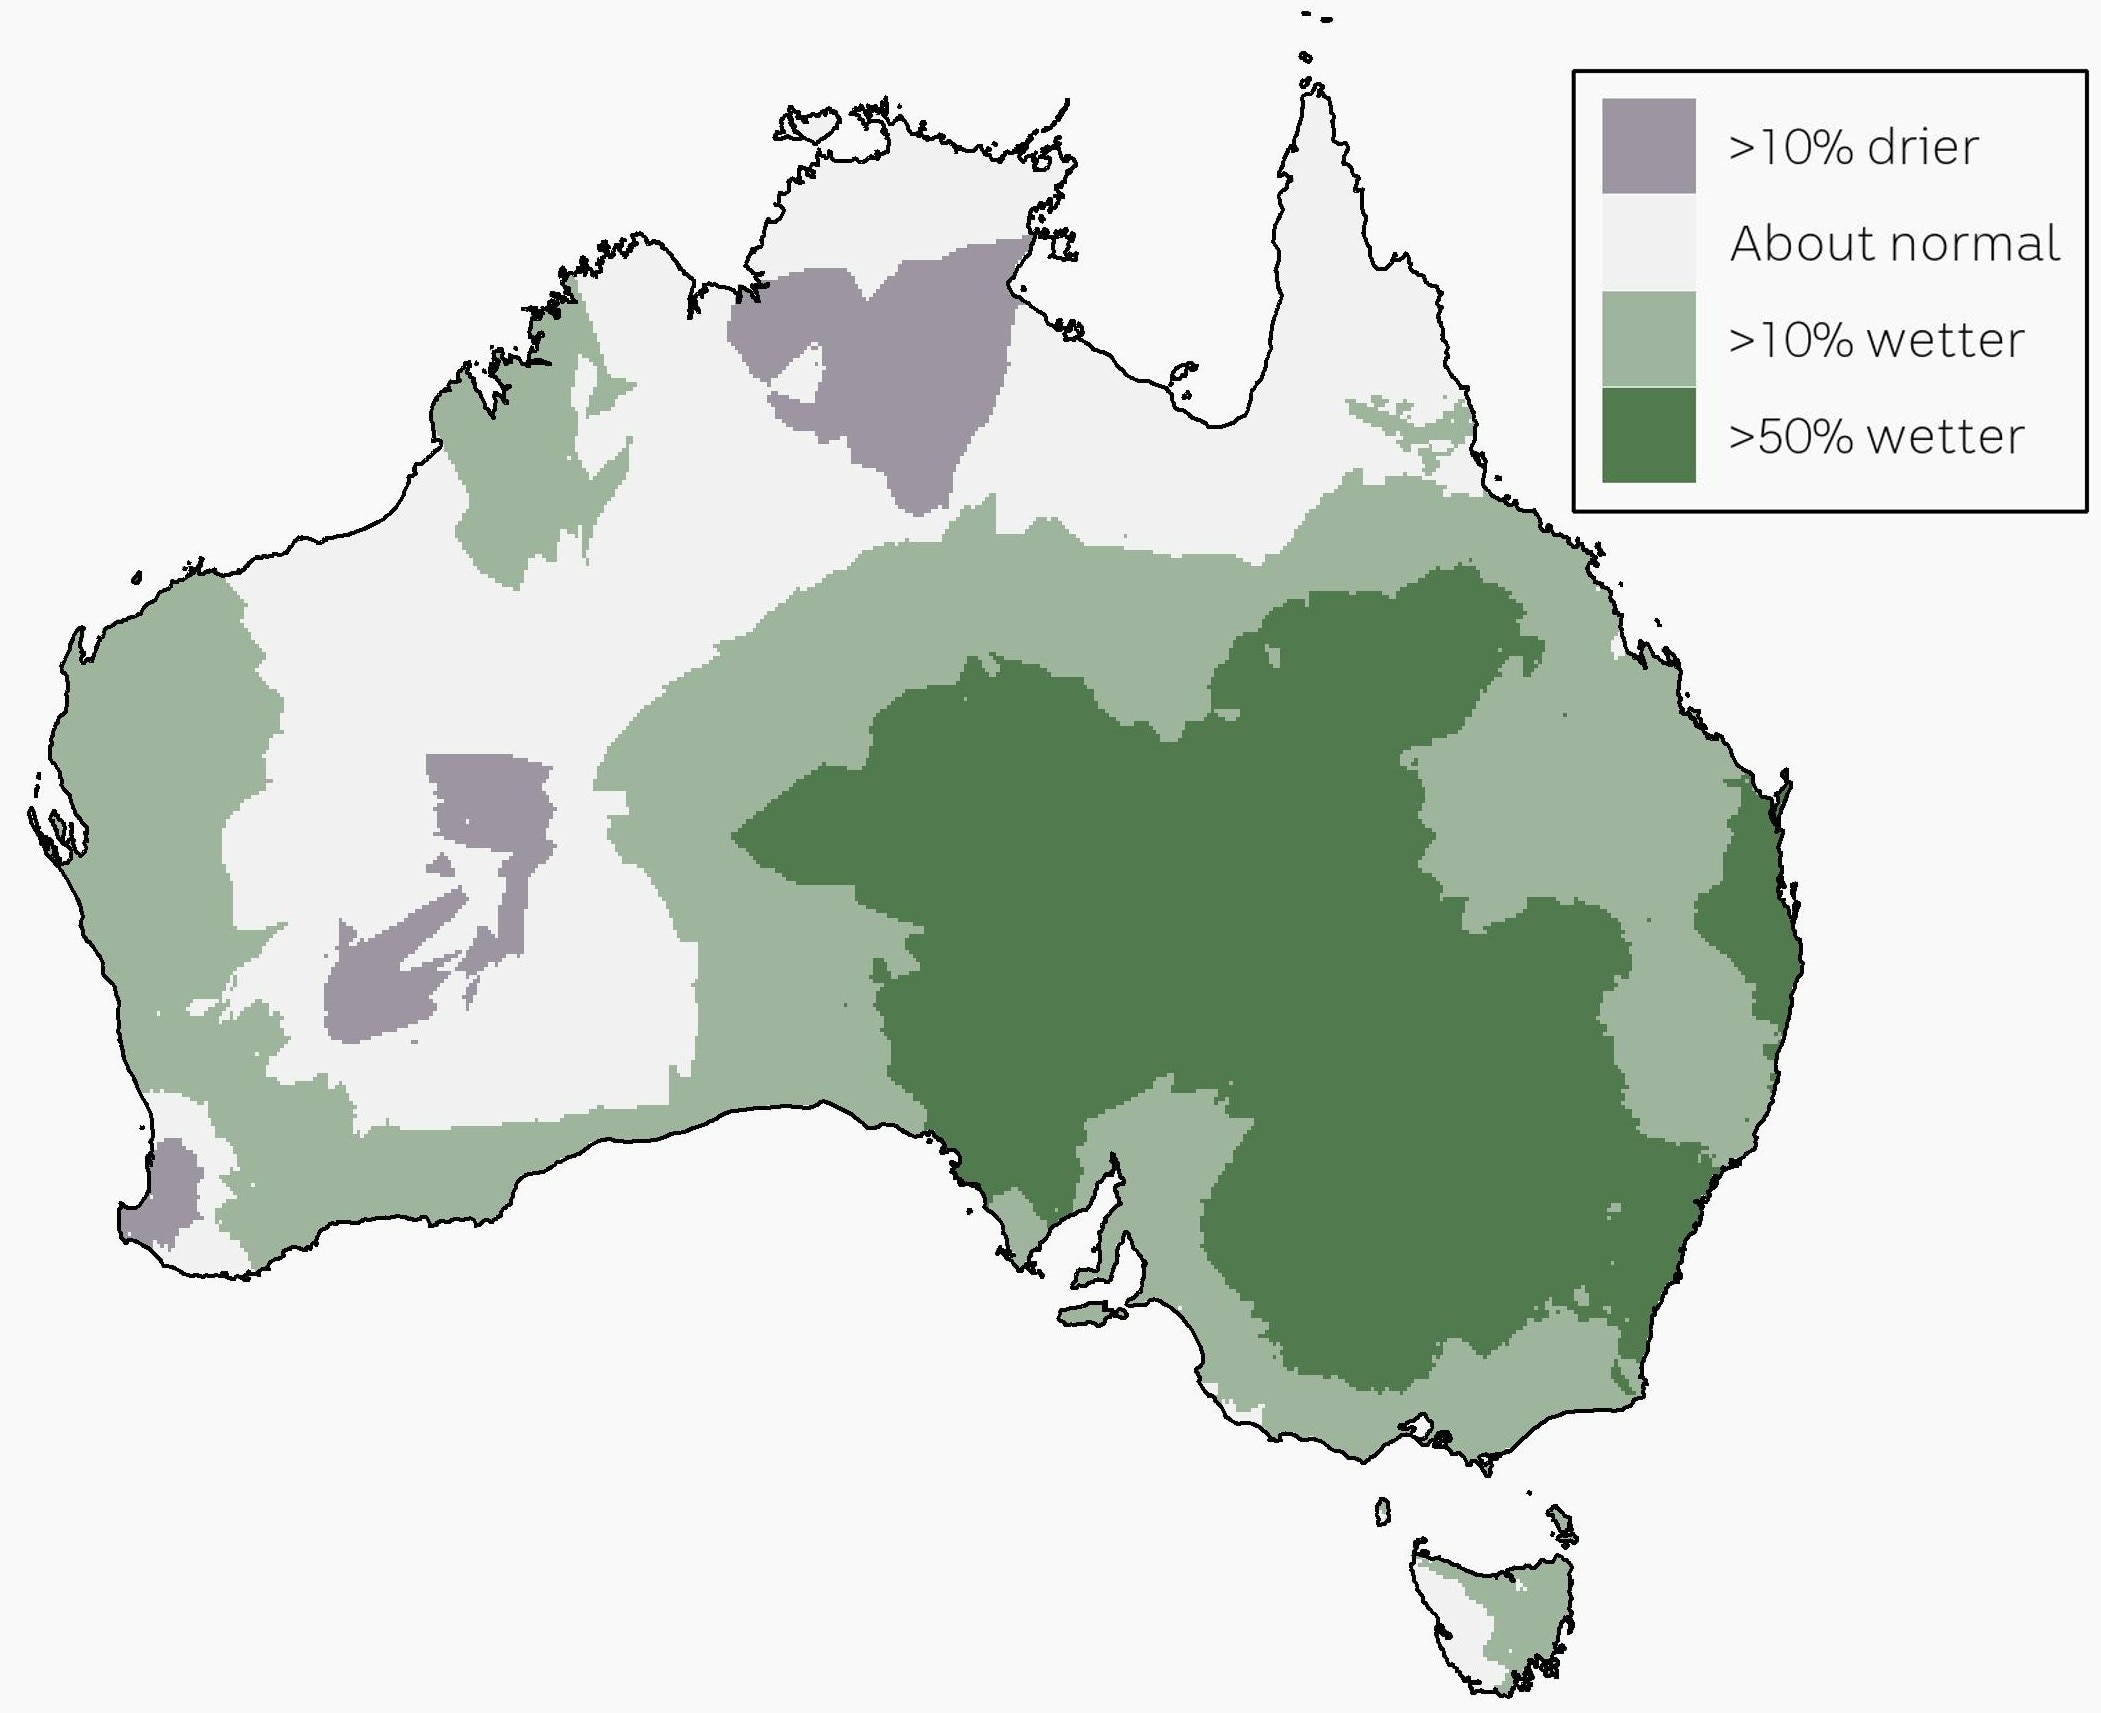 A map showing zones that a 50% wetter in the east, surrounded by areas 10% wetter WA and NT have areas or normal and 10% drier